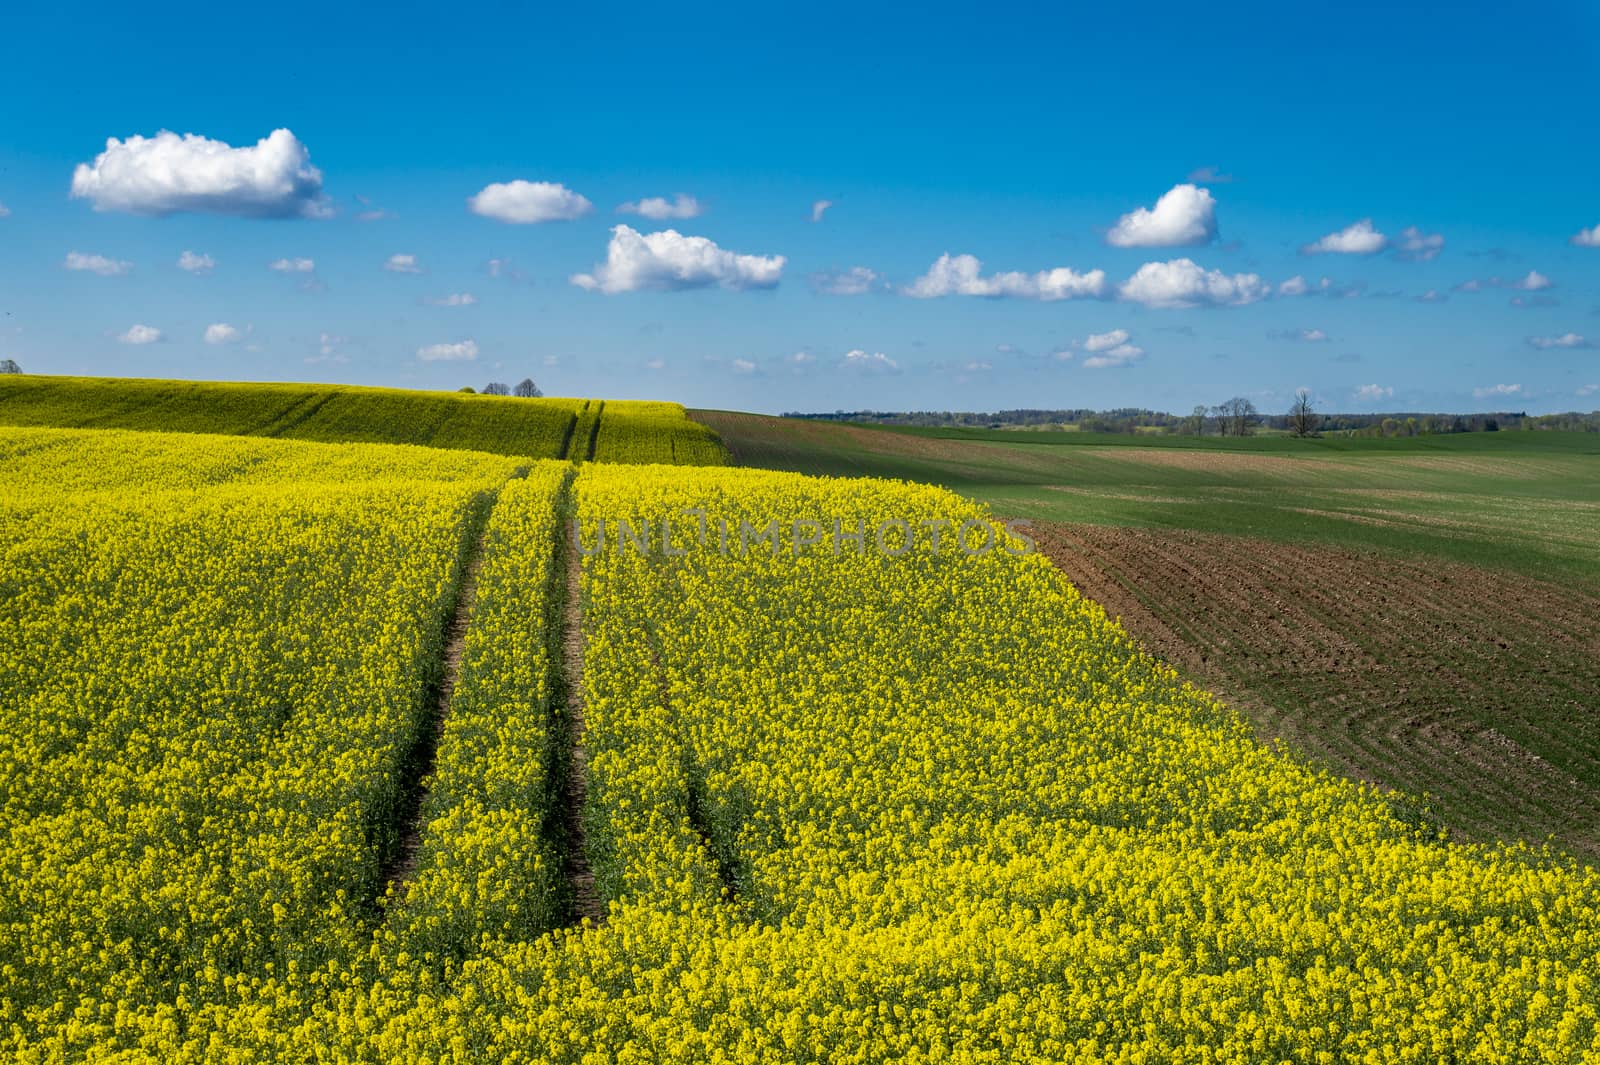 Flowering field of bright yellow rapeseed crop with tyre tracks from a farm vehicle under a sunny blue sky